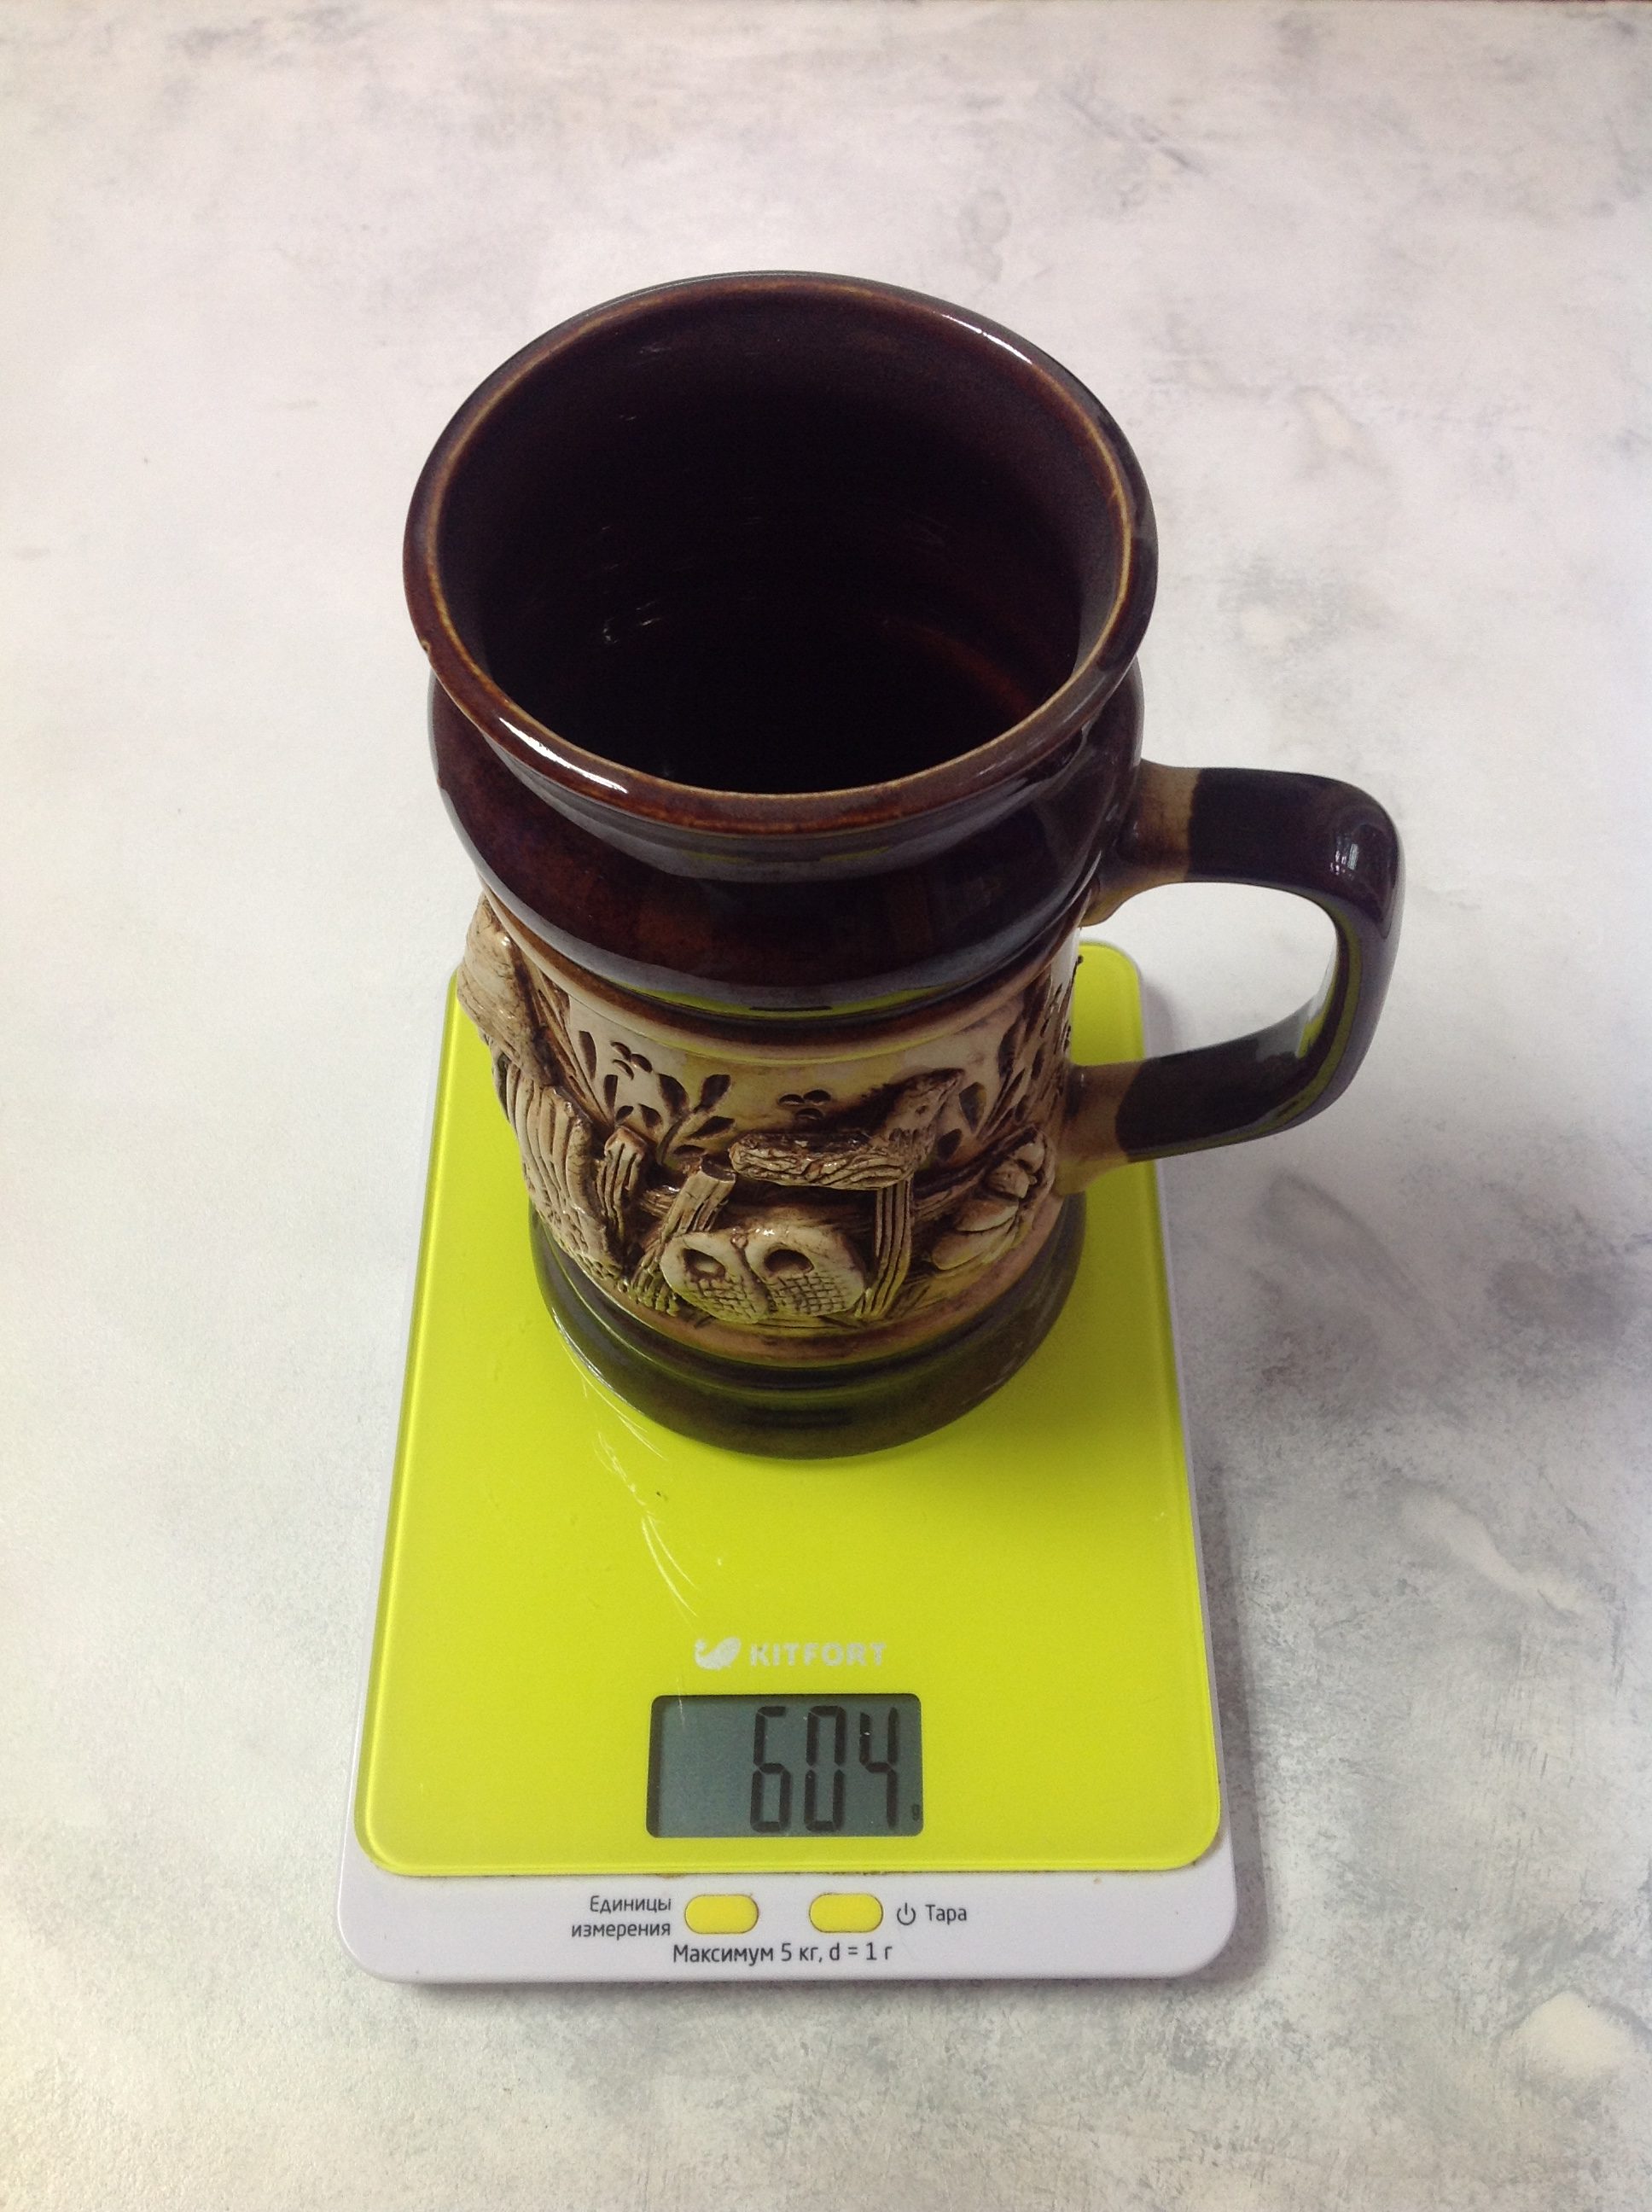 How much does a large ceramic beer mug weigh?